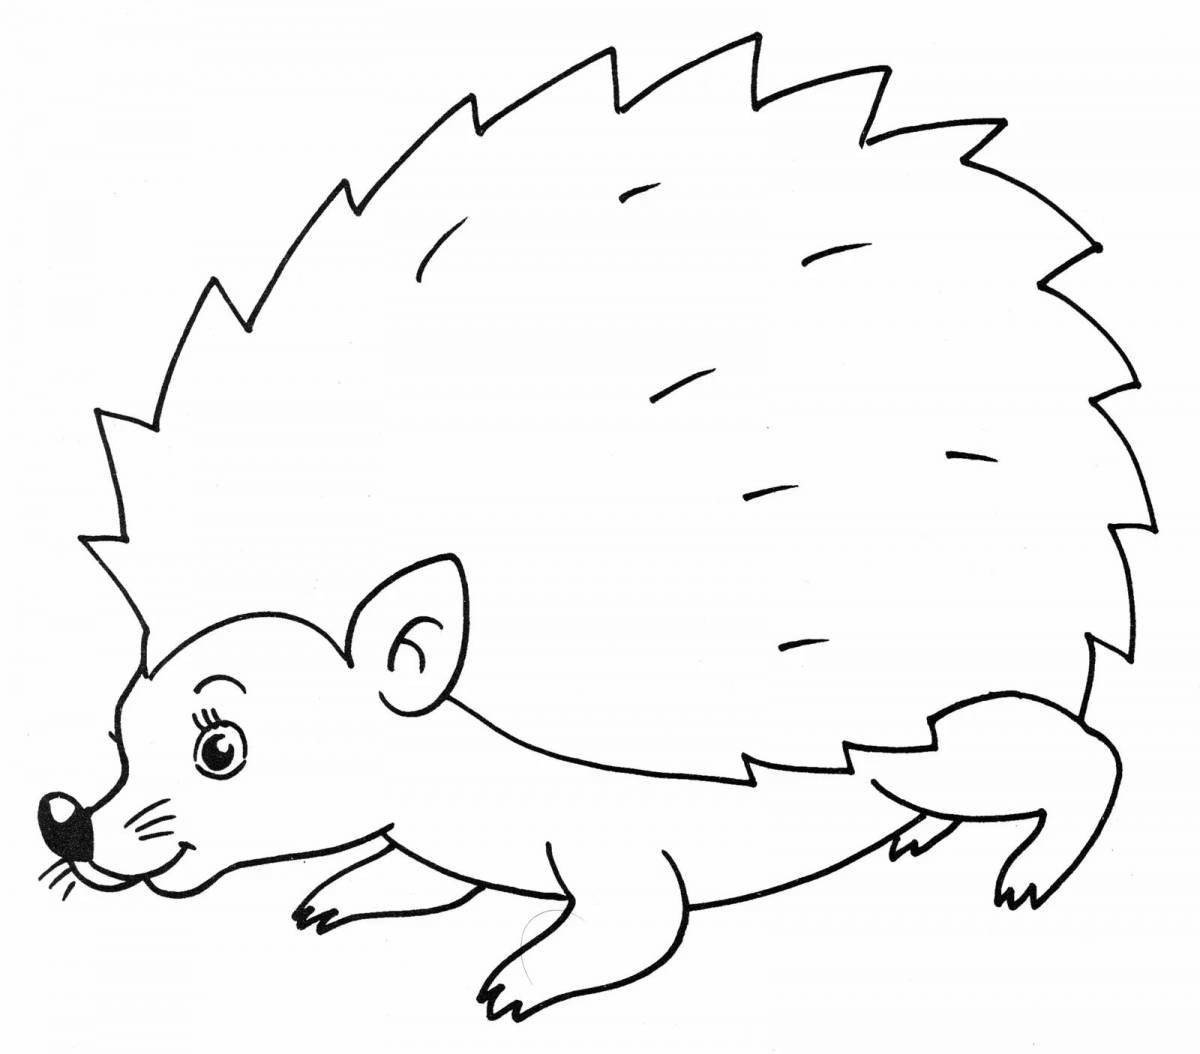 Coloring page adorable long-eared hedgehog